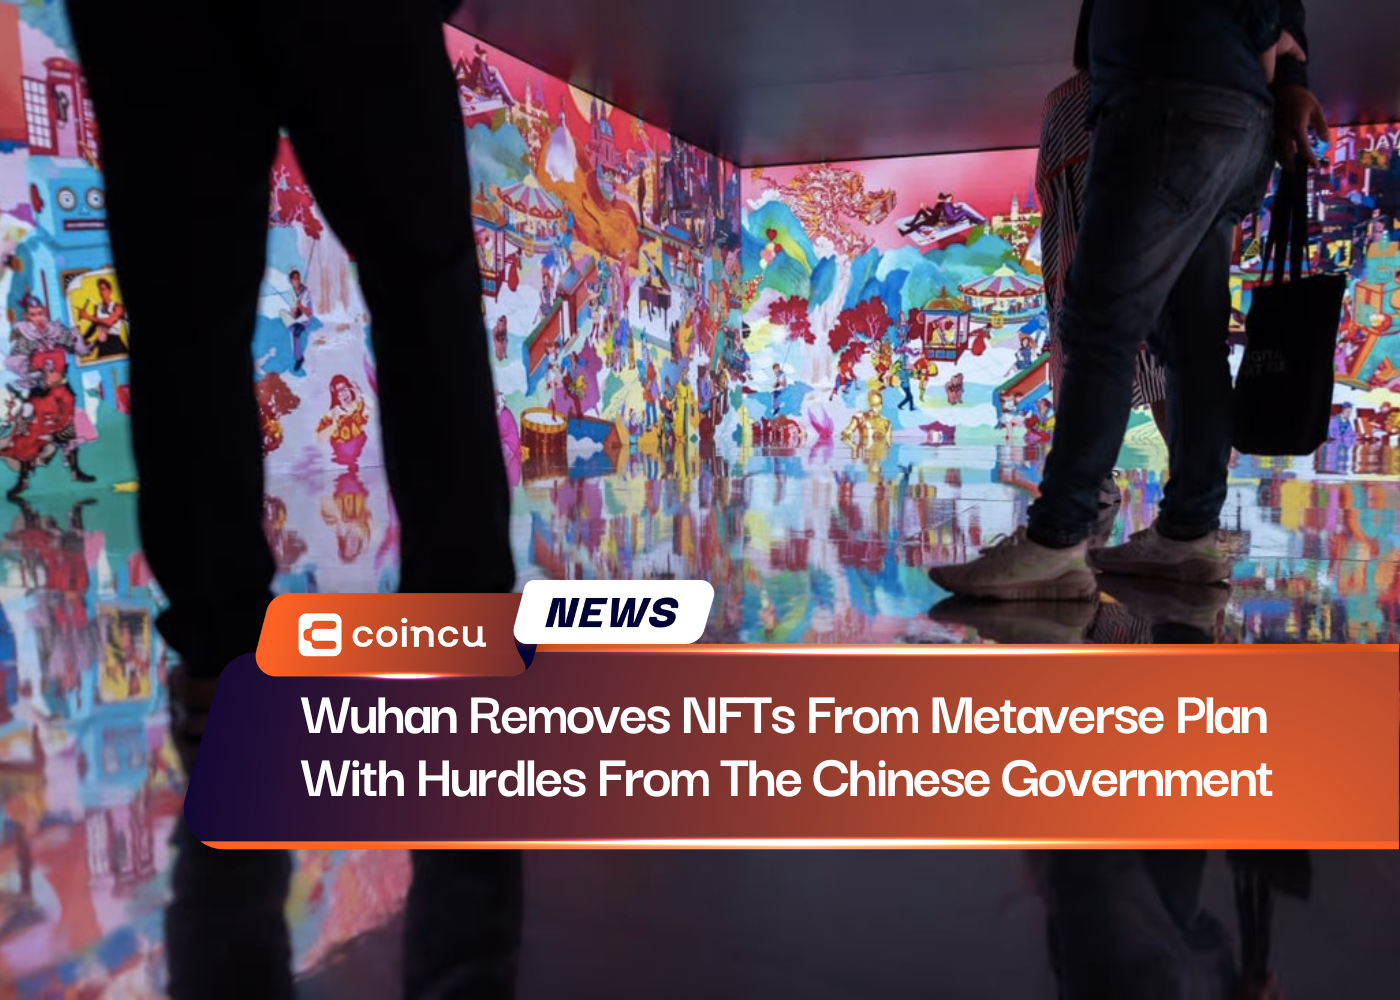 Wuhan Removes NFTs From Metaverse Plan With Hurdles From The Chinese Government